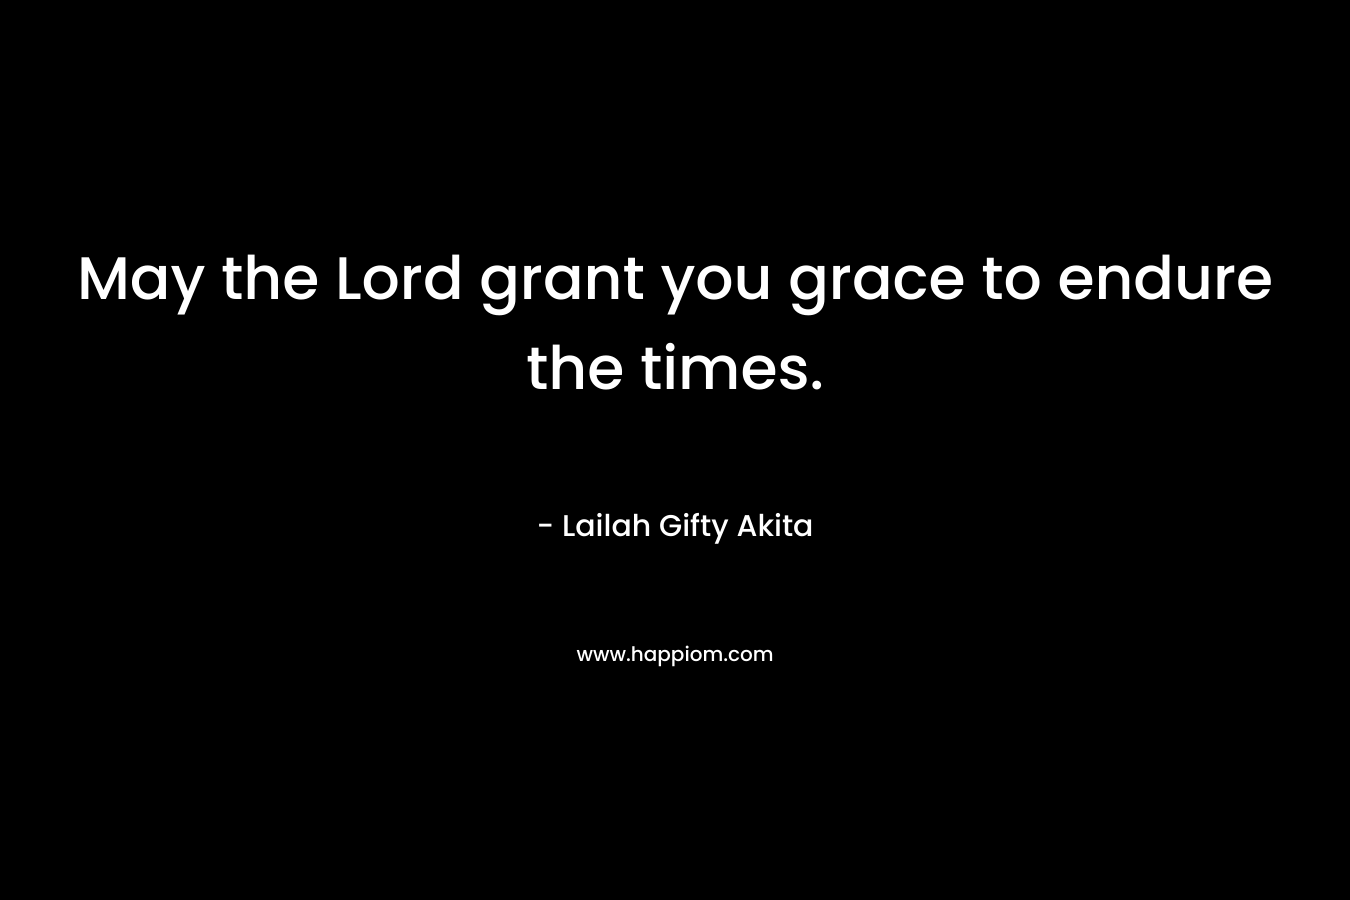 May the Lord grant you grace to endure the times.